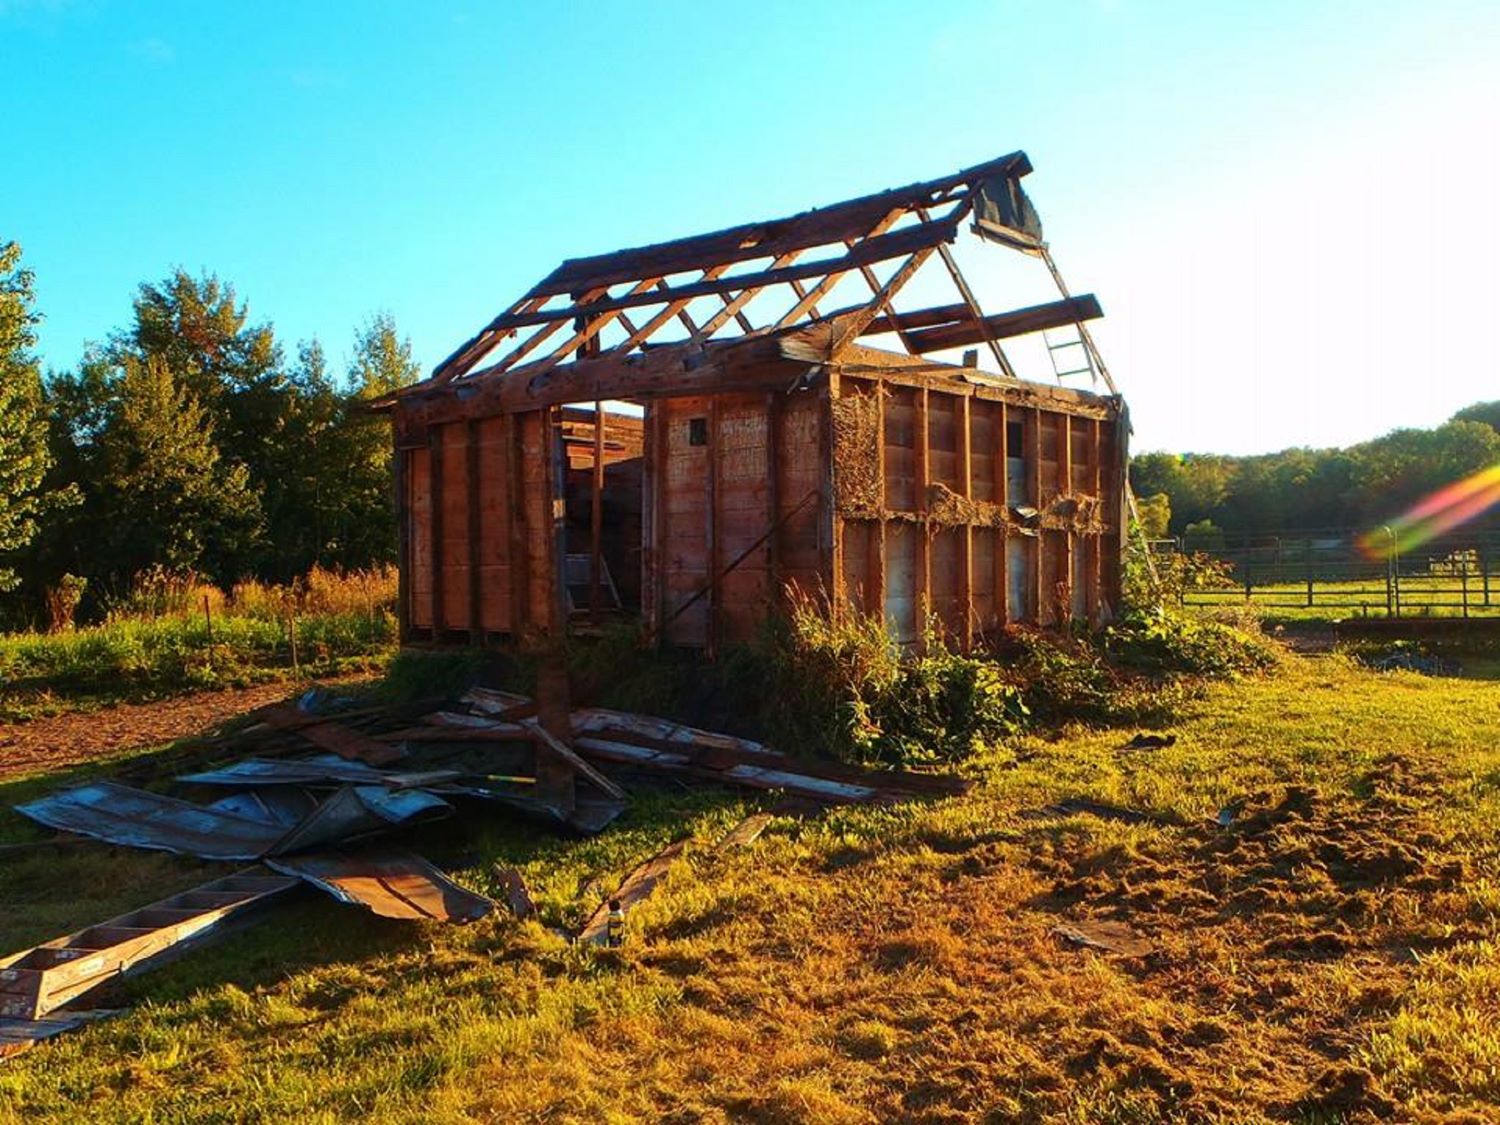 Partially deconstructed 200+ year old shot gun shed